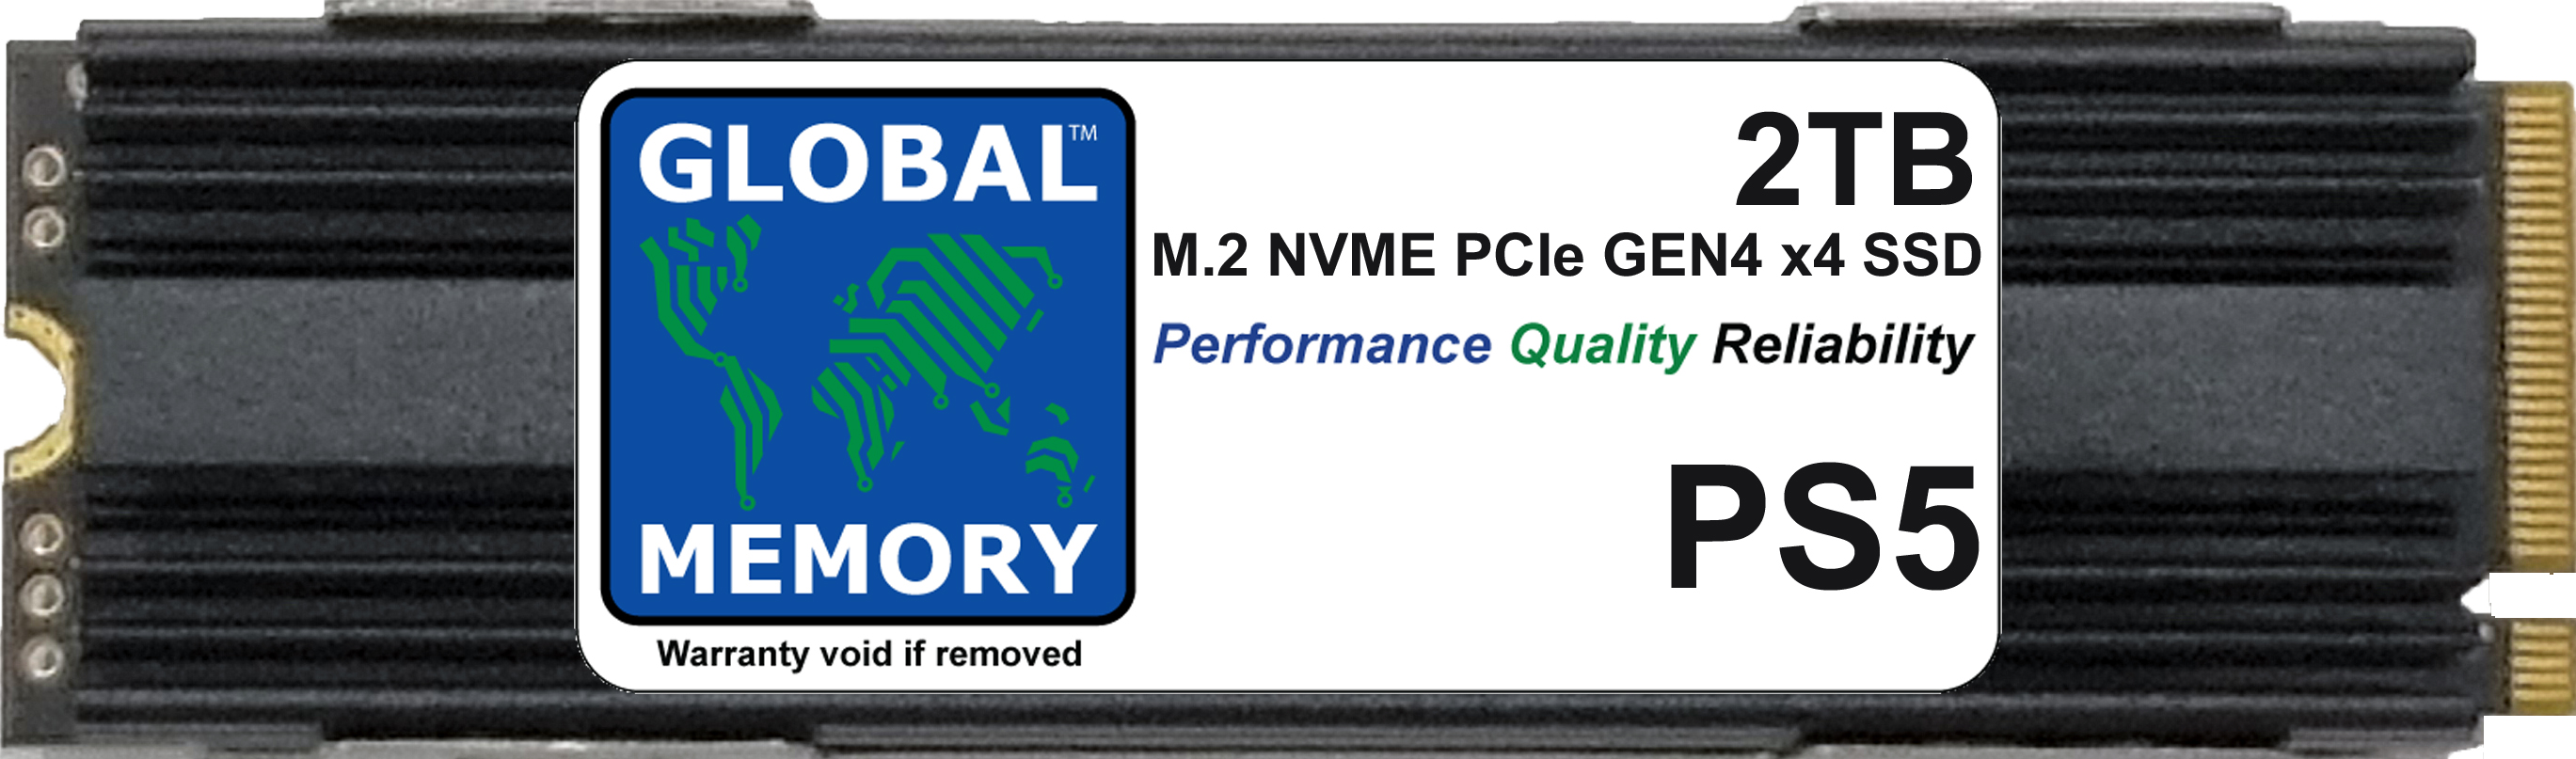 2TB M.2 2280 PCIe Gen4 x4 NVMe SSD WITH DRAM + HEATSINK FOR PLAYSTATION 5 (PS5)